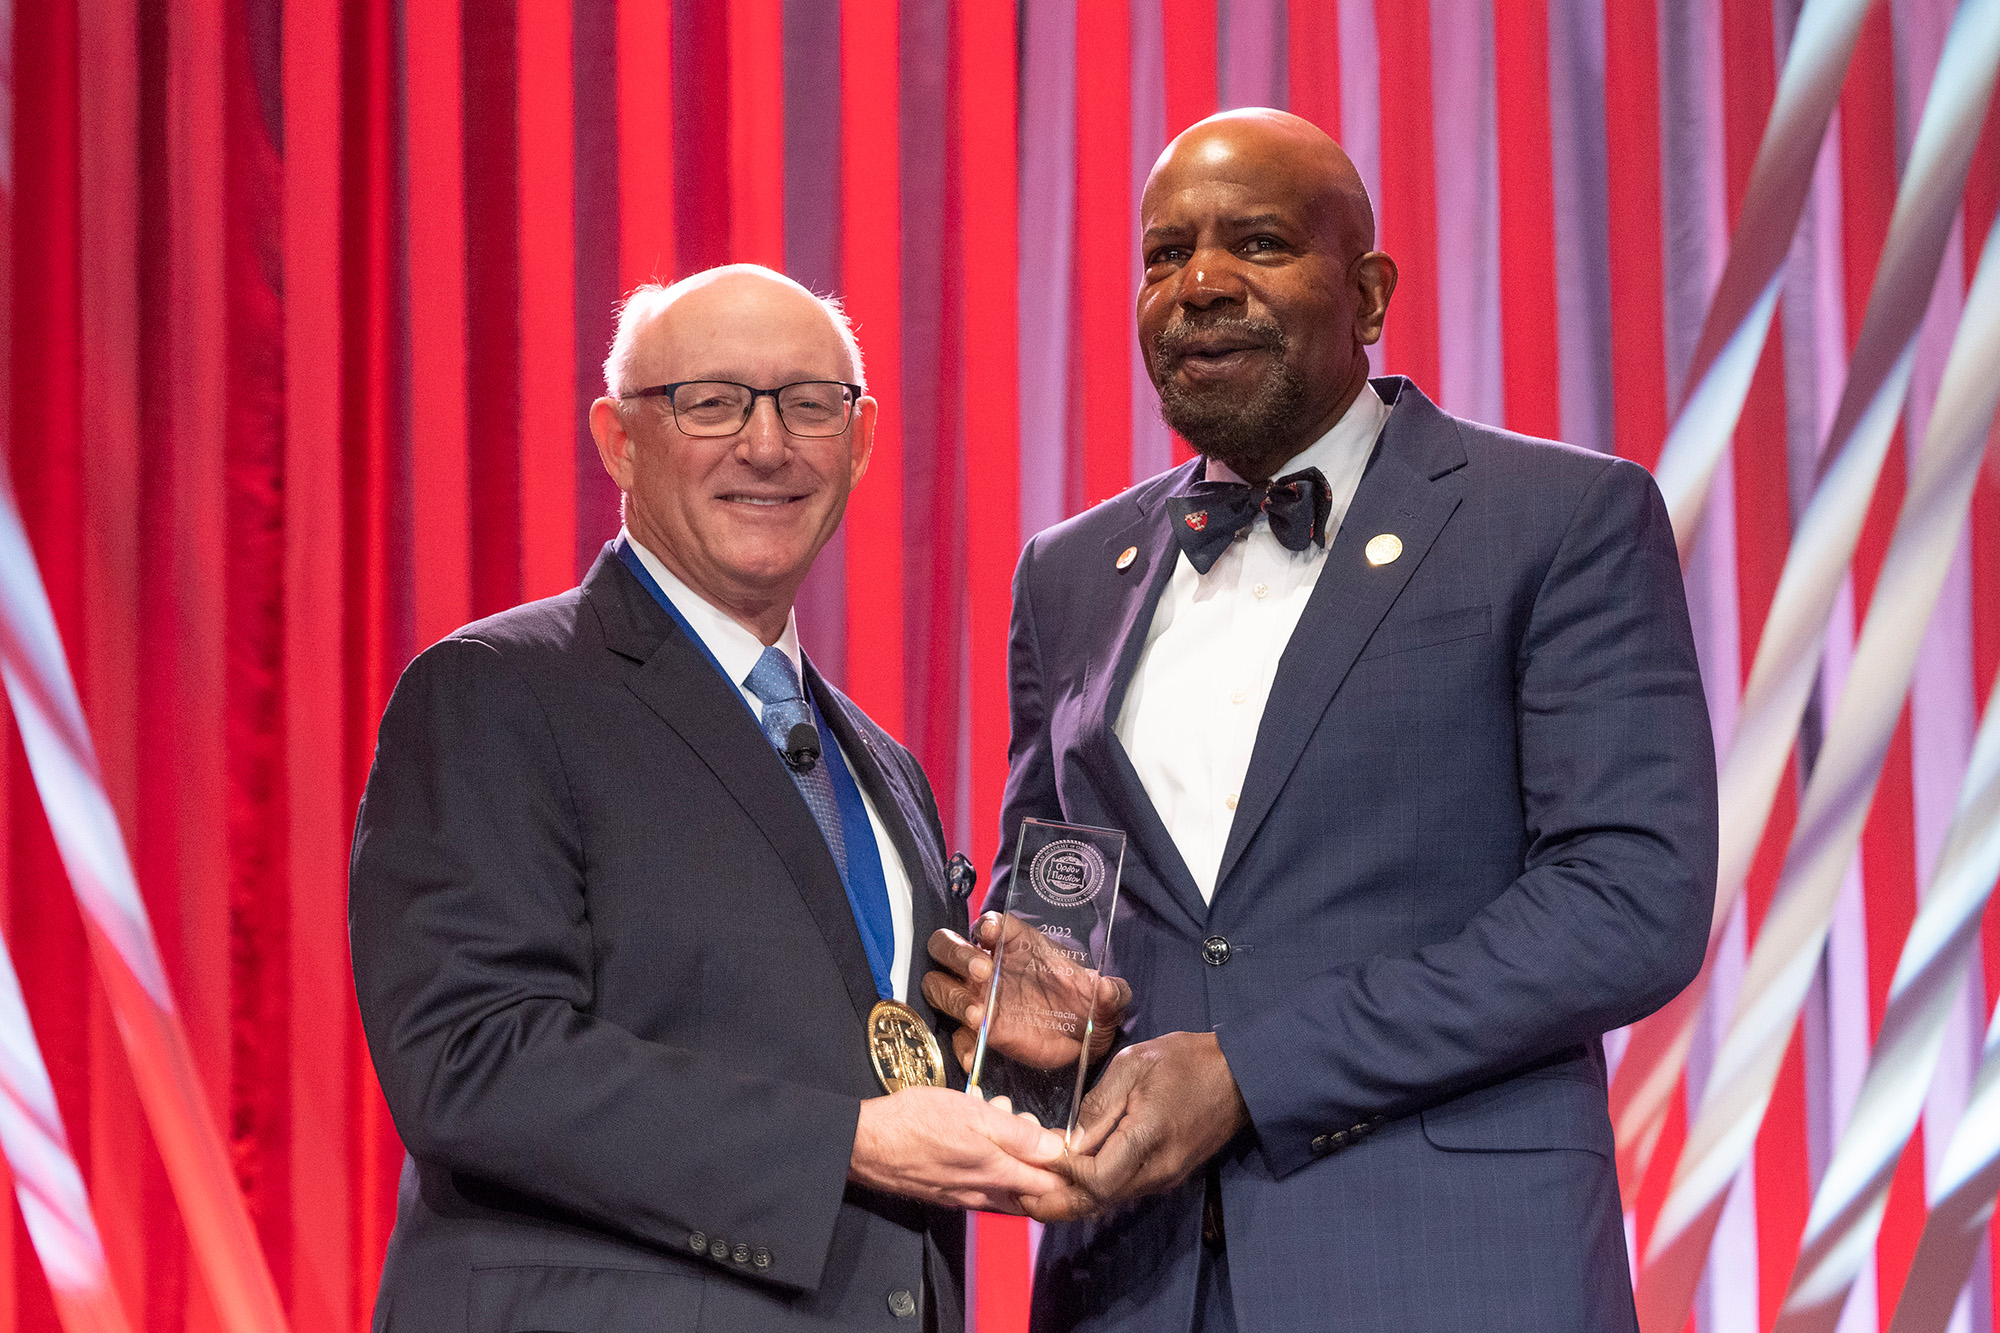 Dr. Cato T. Laurencin receiving the 2022 Diversity Award by AAOS President Daniel K. Guy, MD, FAAOS during the American Academy of Orthopaedic Surgeons (AAOS) 2022 Annual meeting at the McCormick Convention Center in Chicago on March 24, 2022. The conference is the preeminent meeting on musculoskeletal education to orthopaedic surgeons and allied health professionals in the world ( Photo by © AAOS/Todd Buchanan 2022).